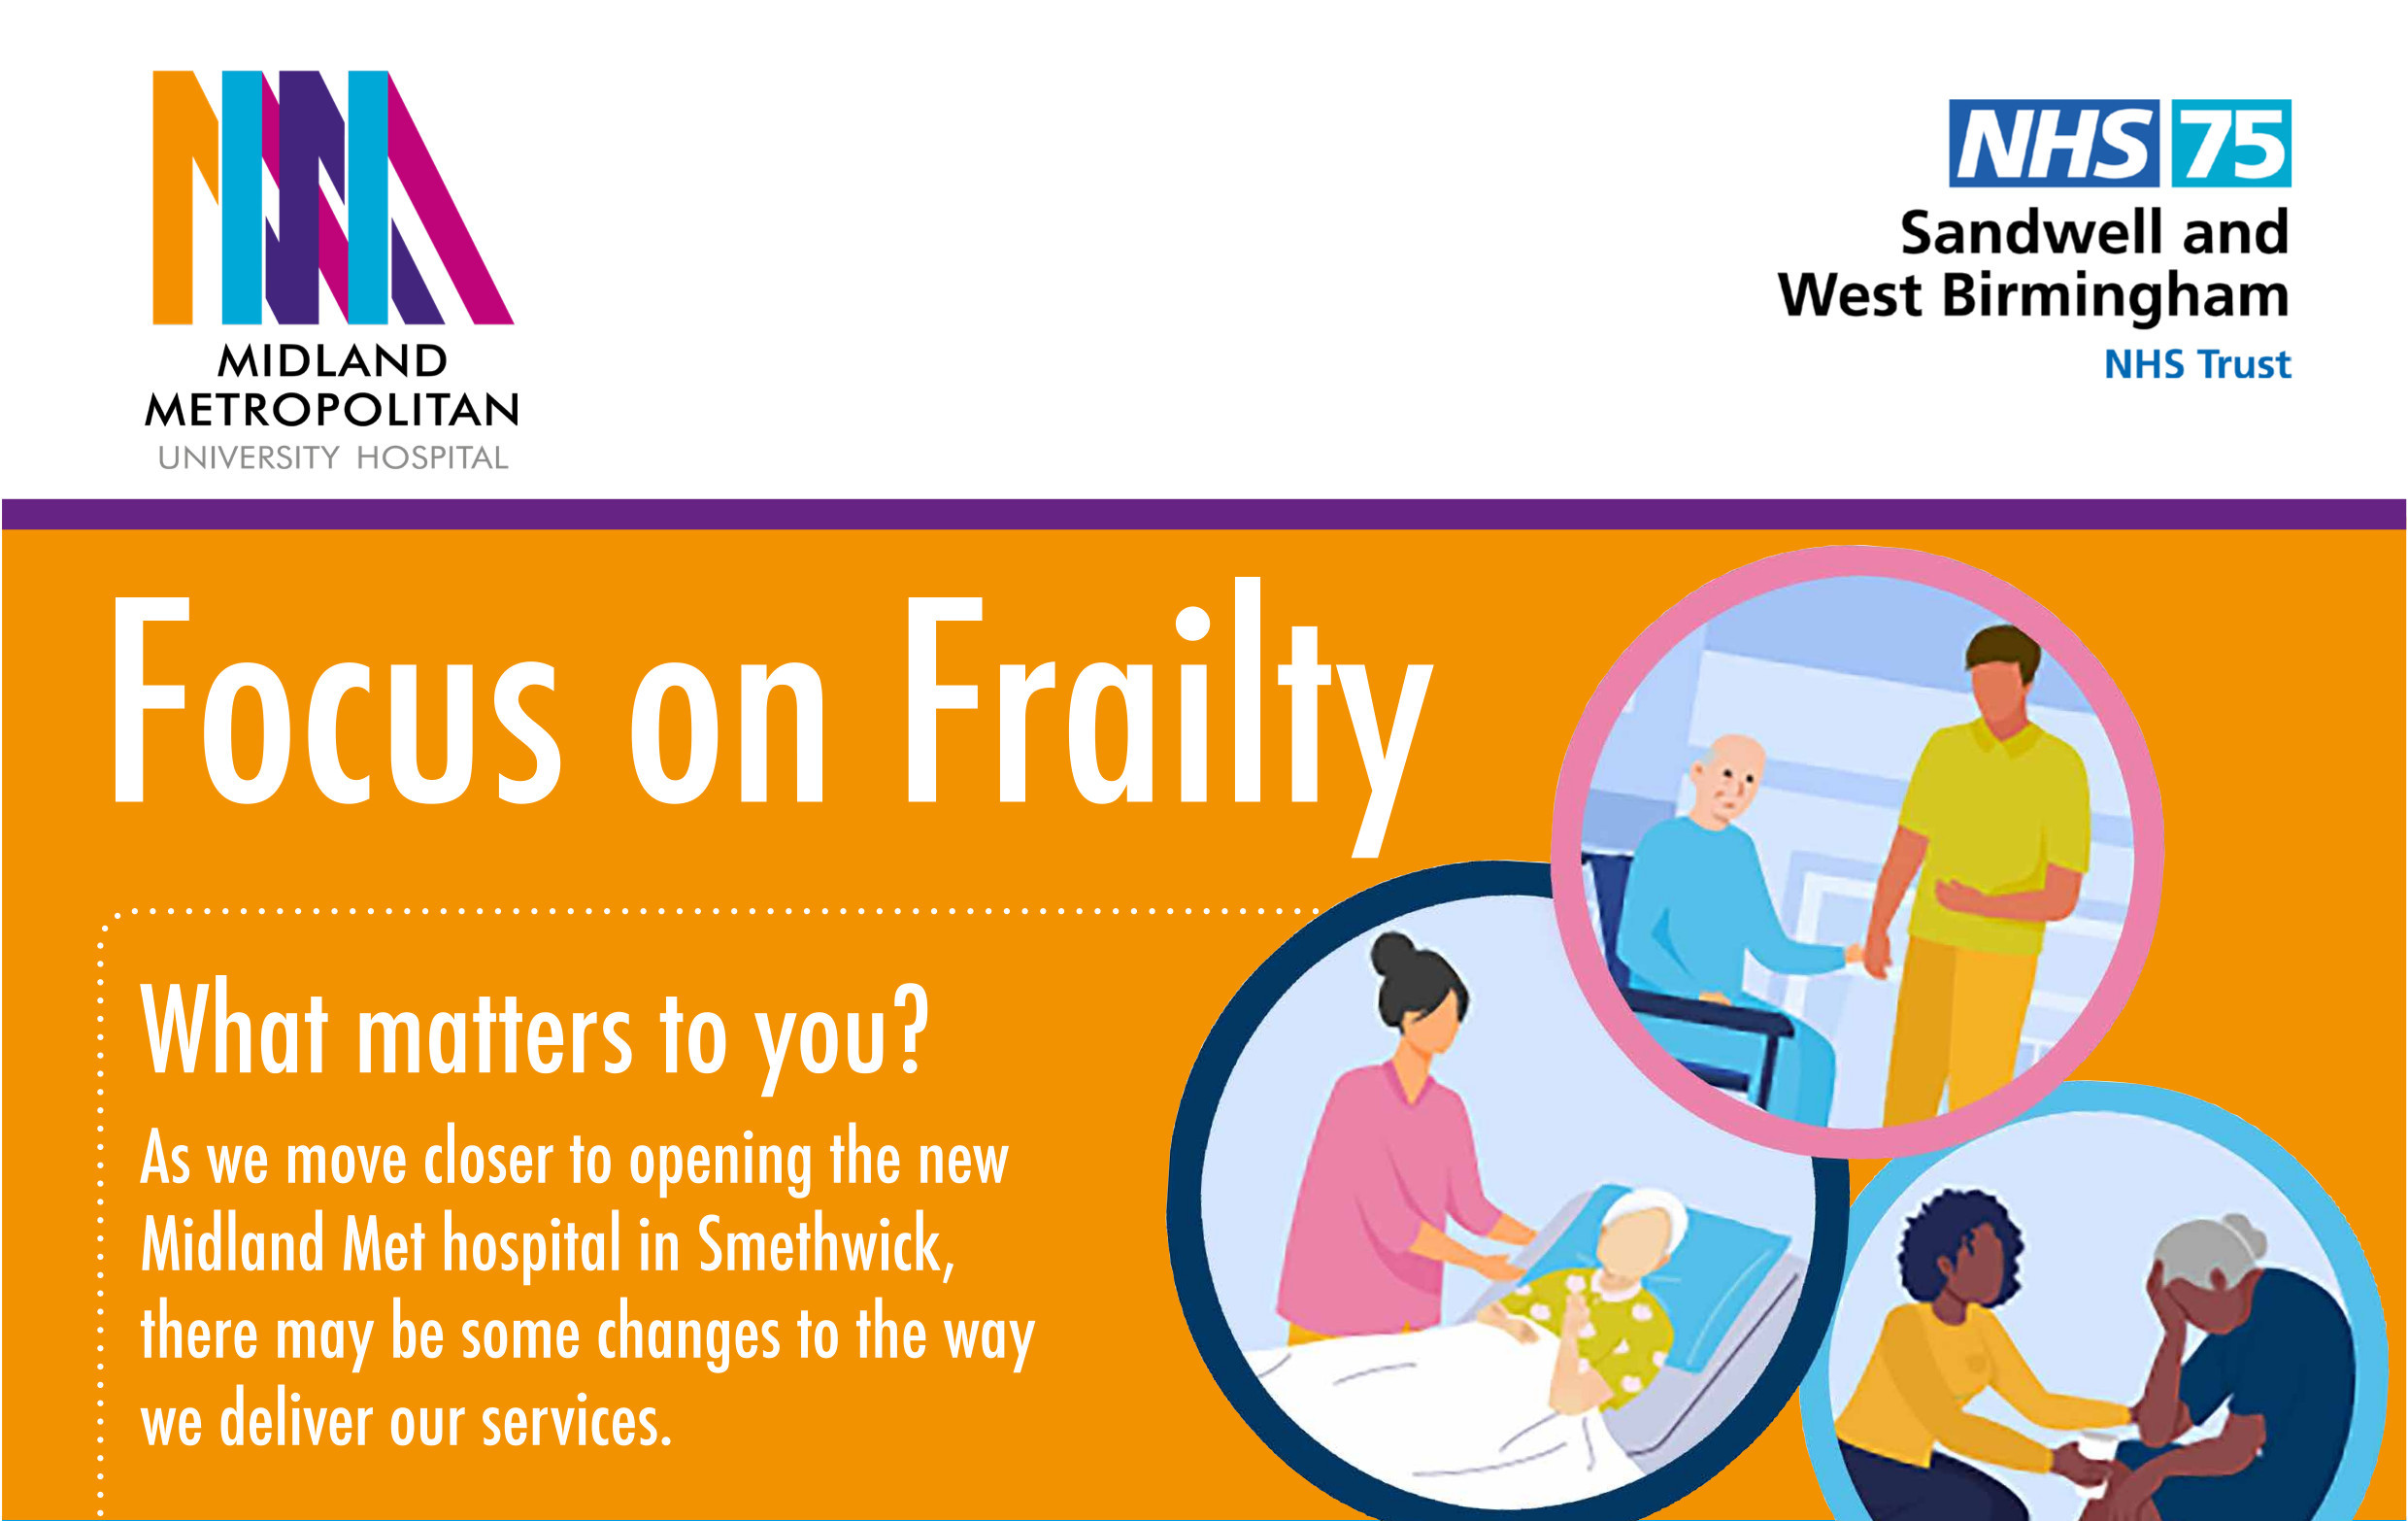 From the Midland Metropolitan University Hospital and Sandwell & West Birmingham NHS Trust Focus on Frailty What matters to you? As we move closer to opening the new Midland Met hospital in Smethwick, there may be some changes to the way we deliver our services.